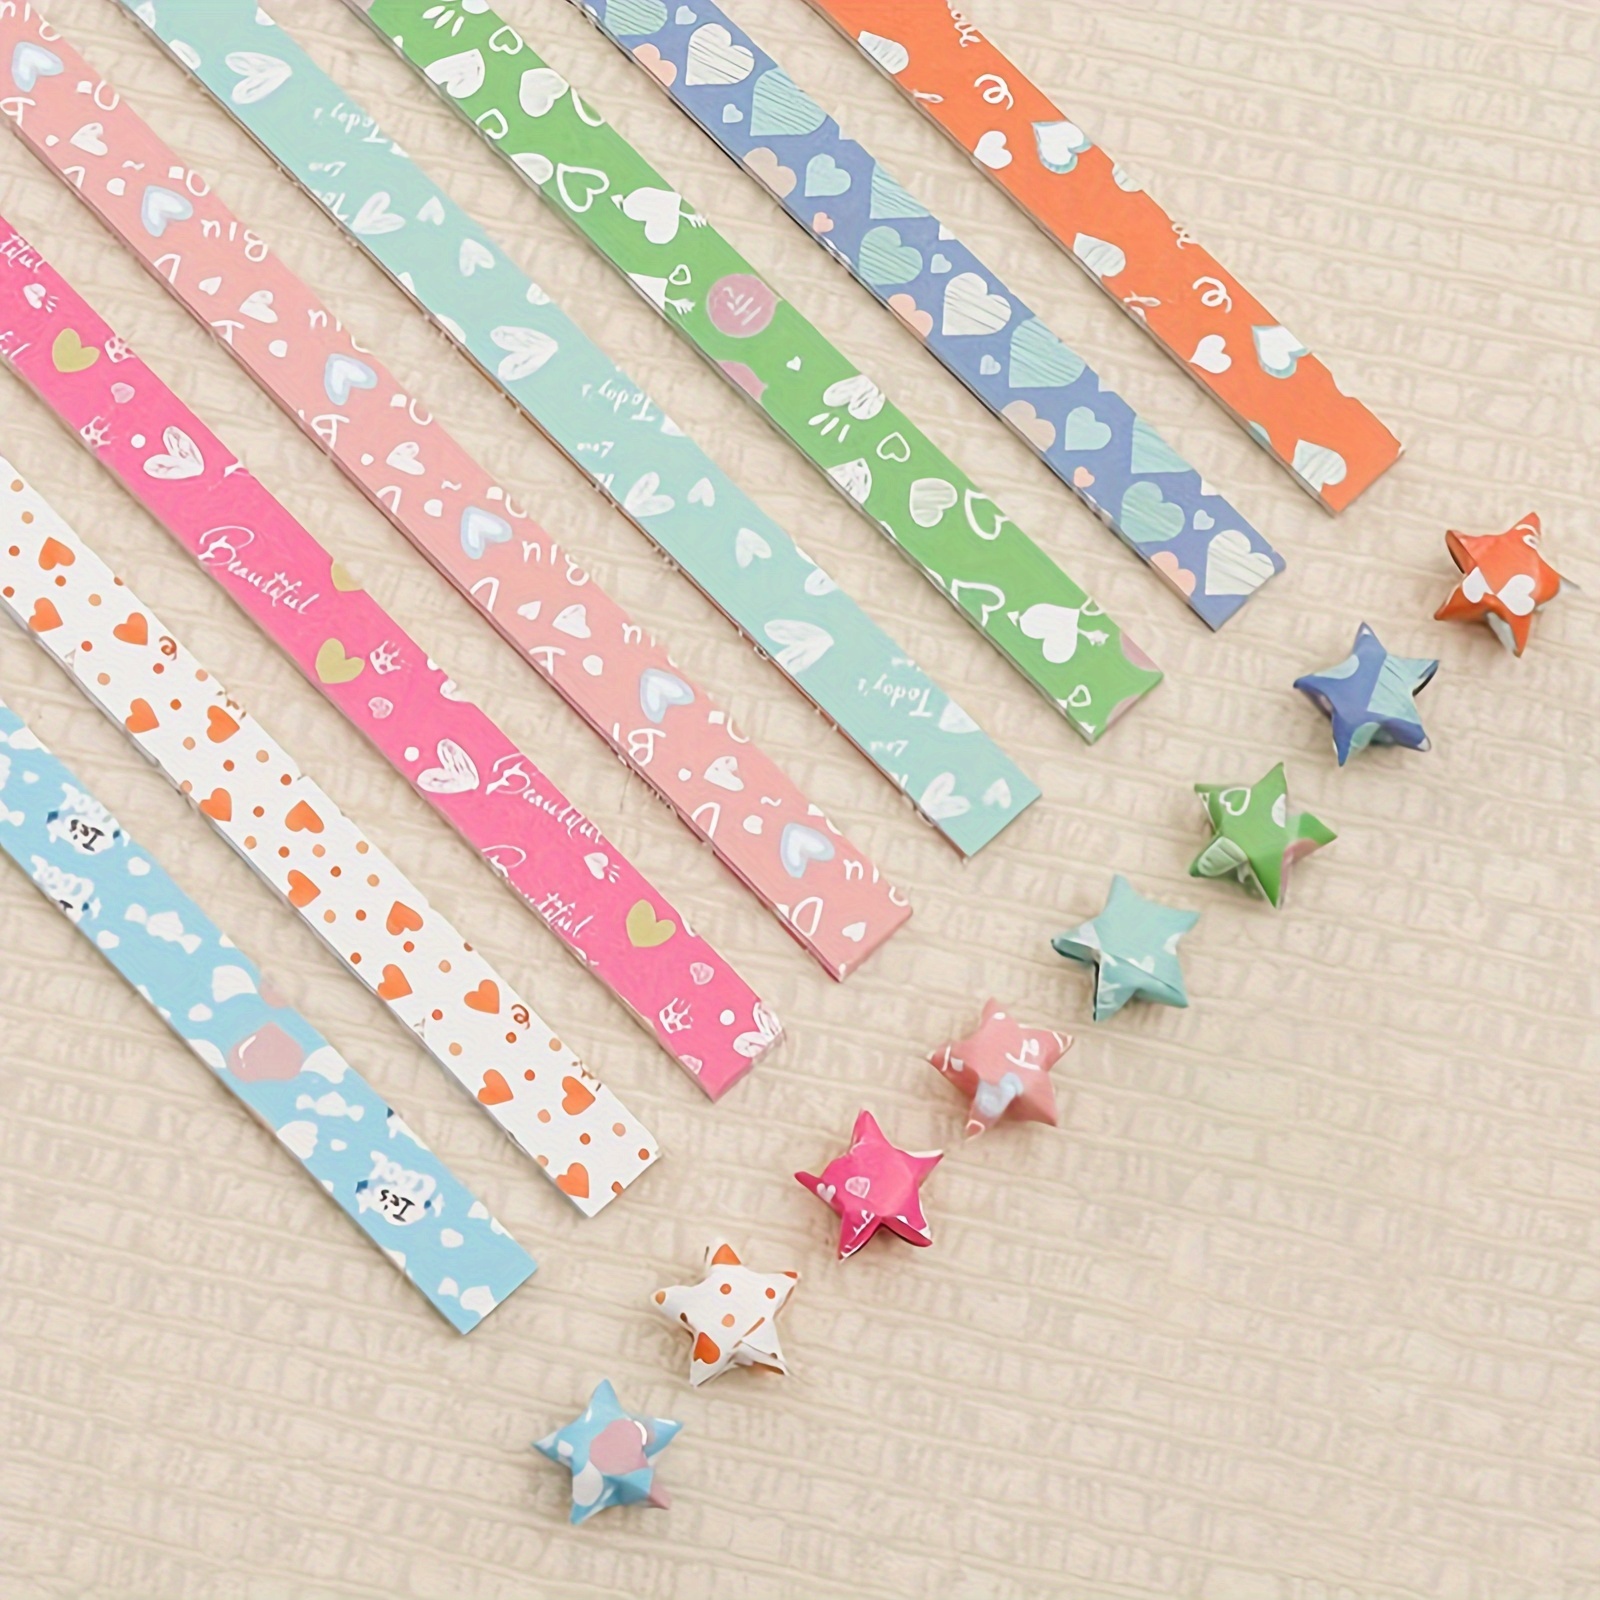 Paper Strips to Make Origami Stars, 540/1350 Sheets Origami Star